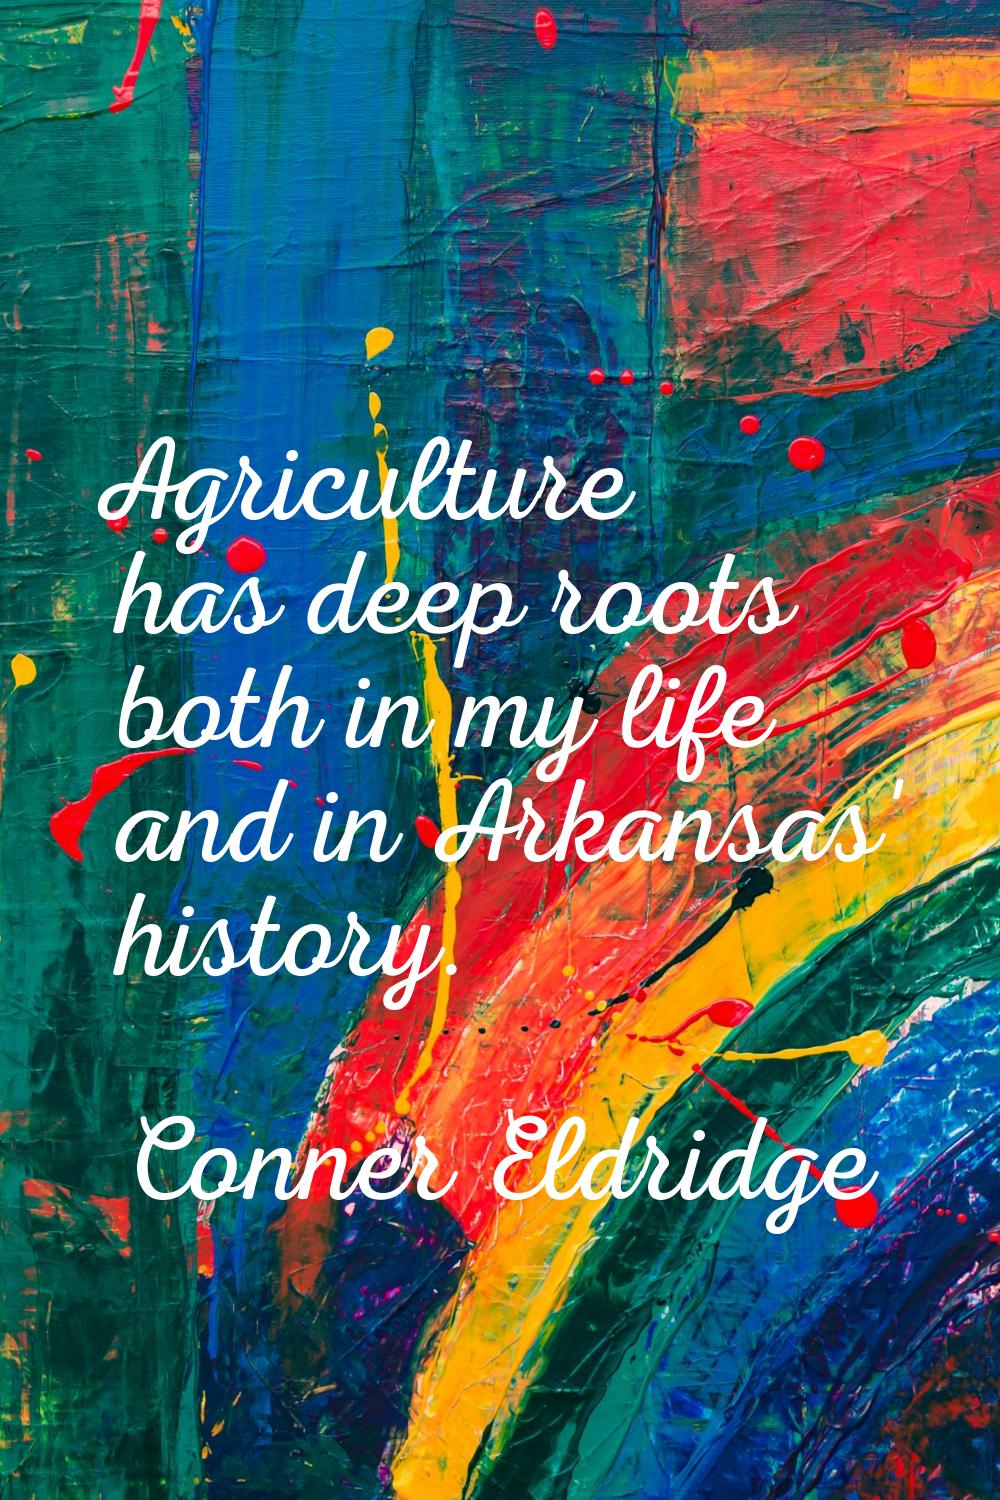 Agriculture has deep roots both in my life and in Arkansas' history.